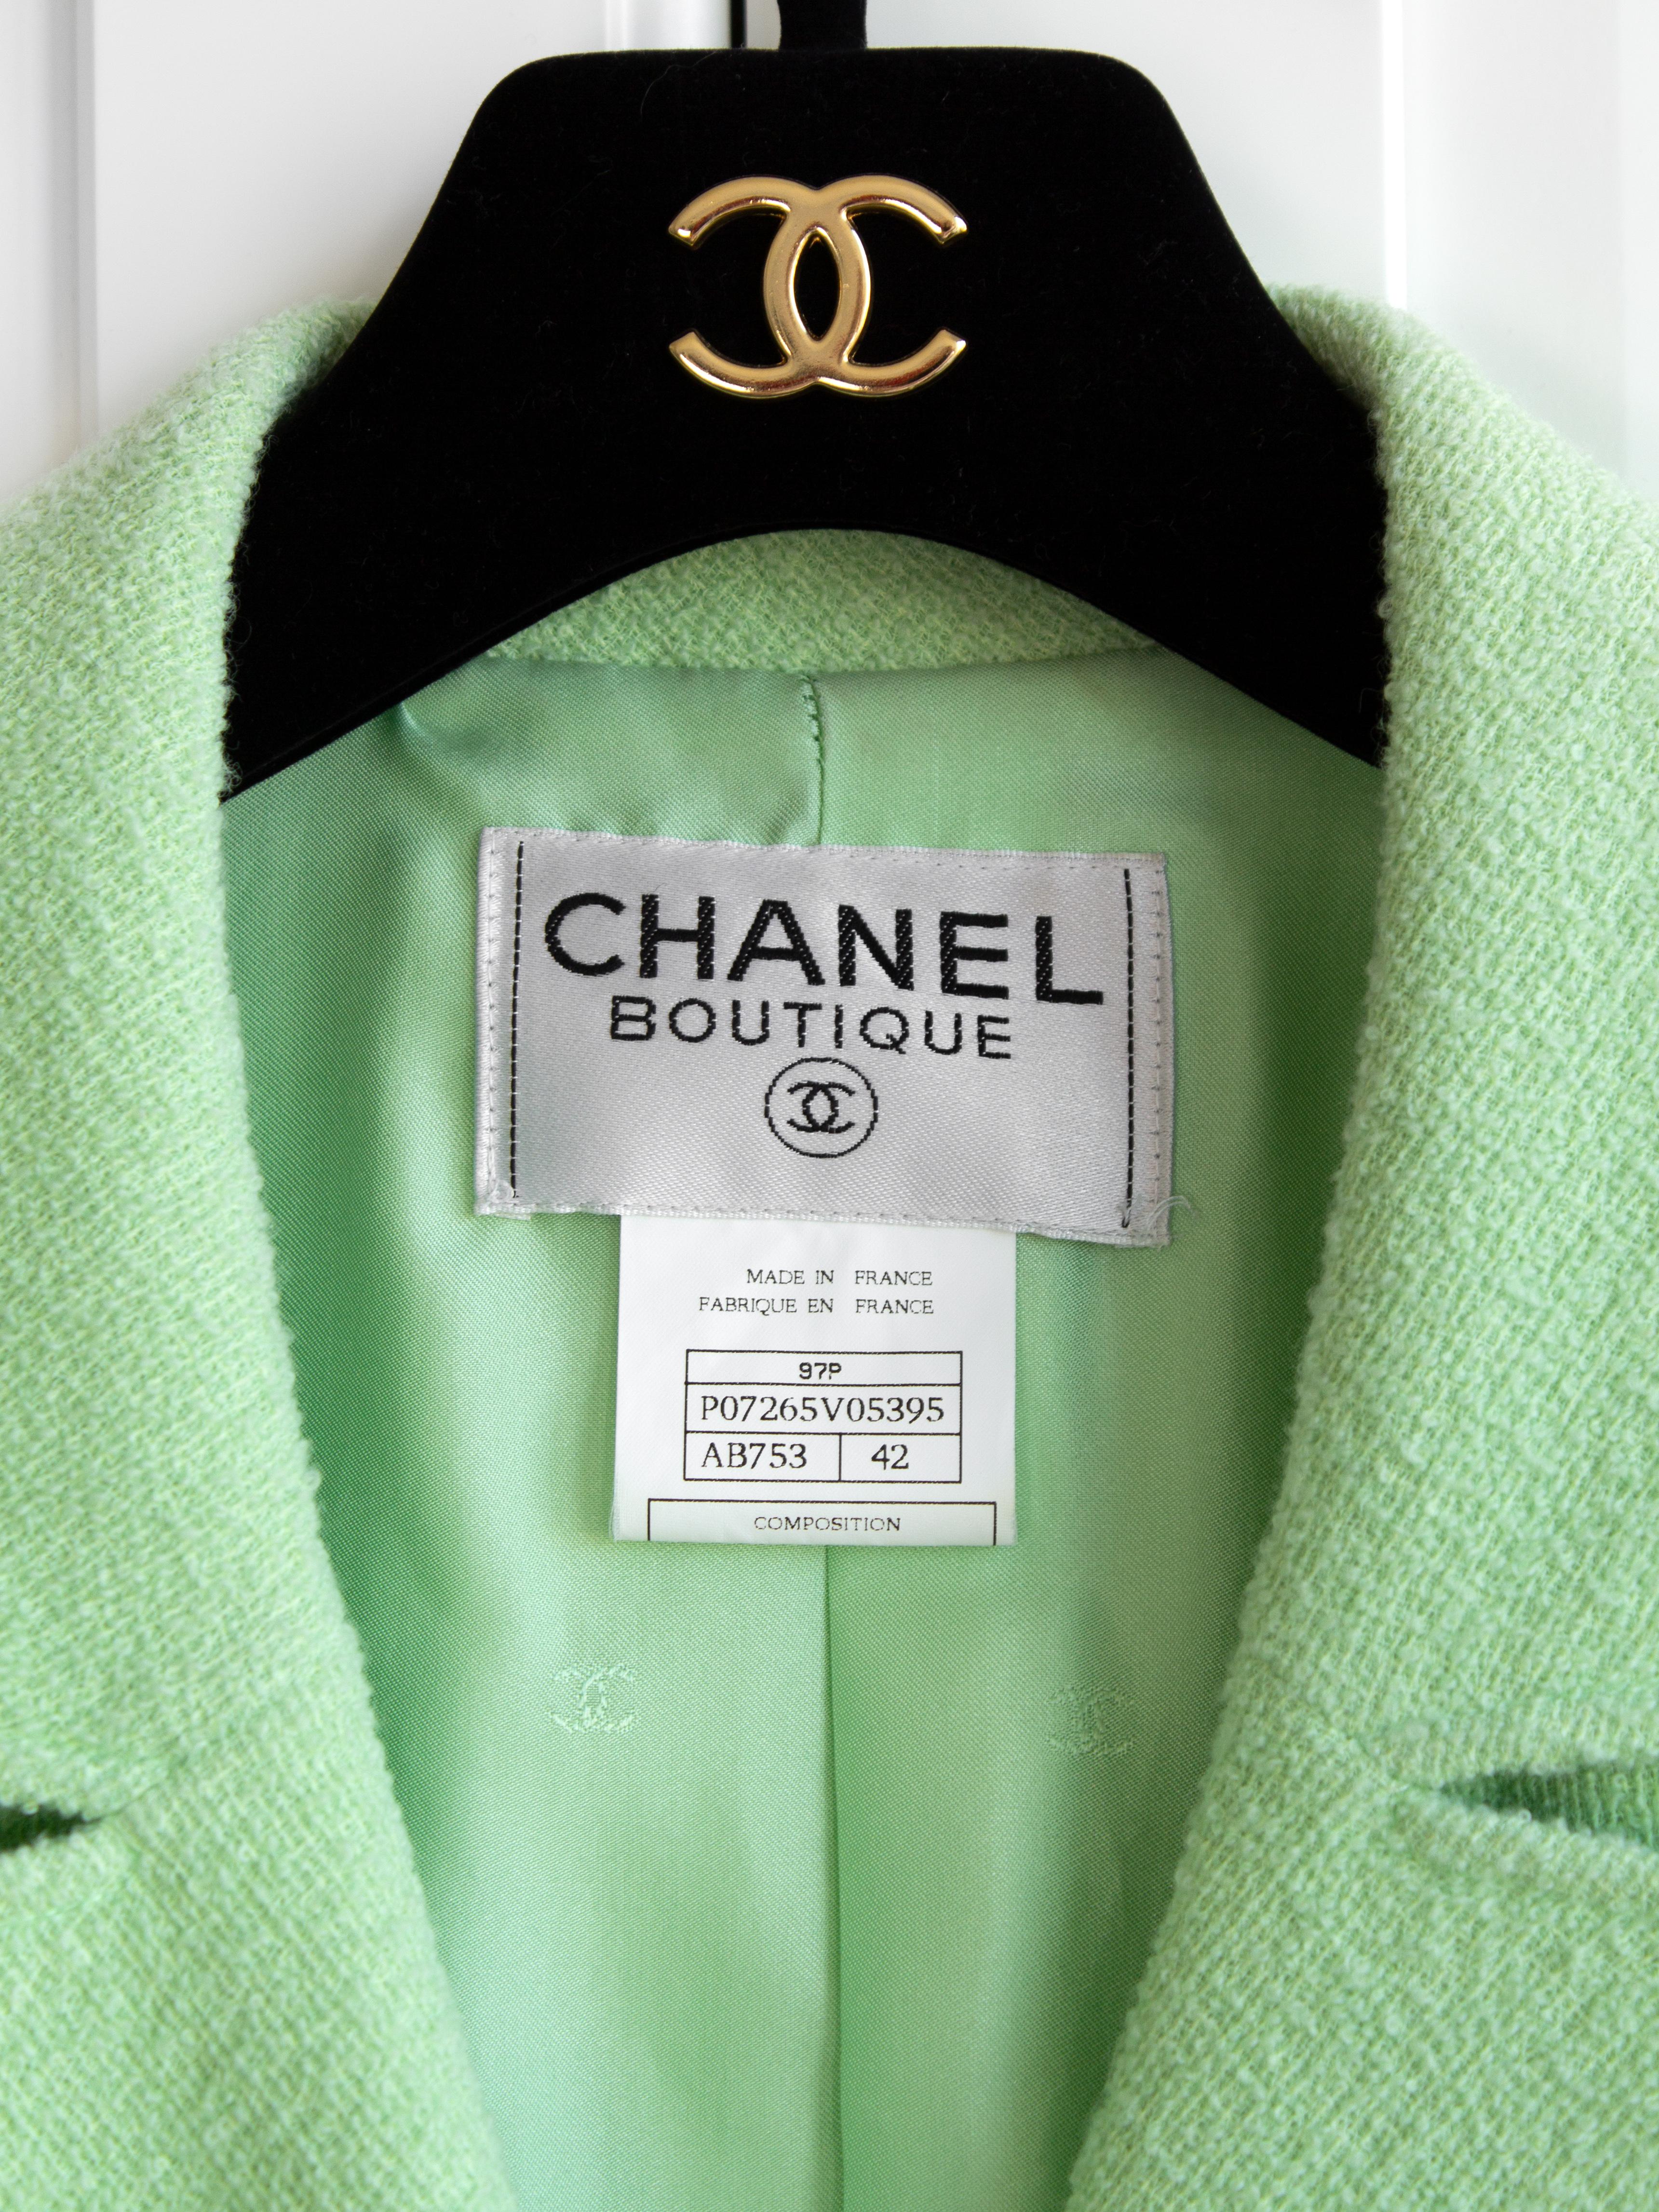 Iconic Chanel Vintage Princess Diana S/S 1997 Green Tweed CC 97P Jacket In Good Condition For Sale In Jersey City, NJ